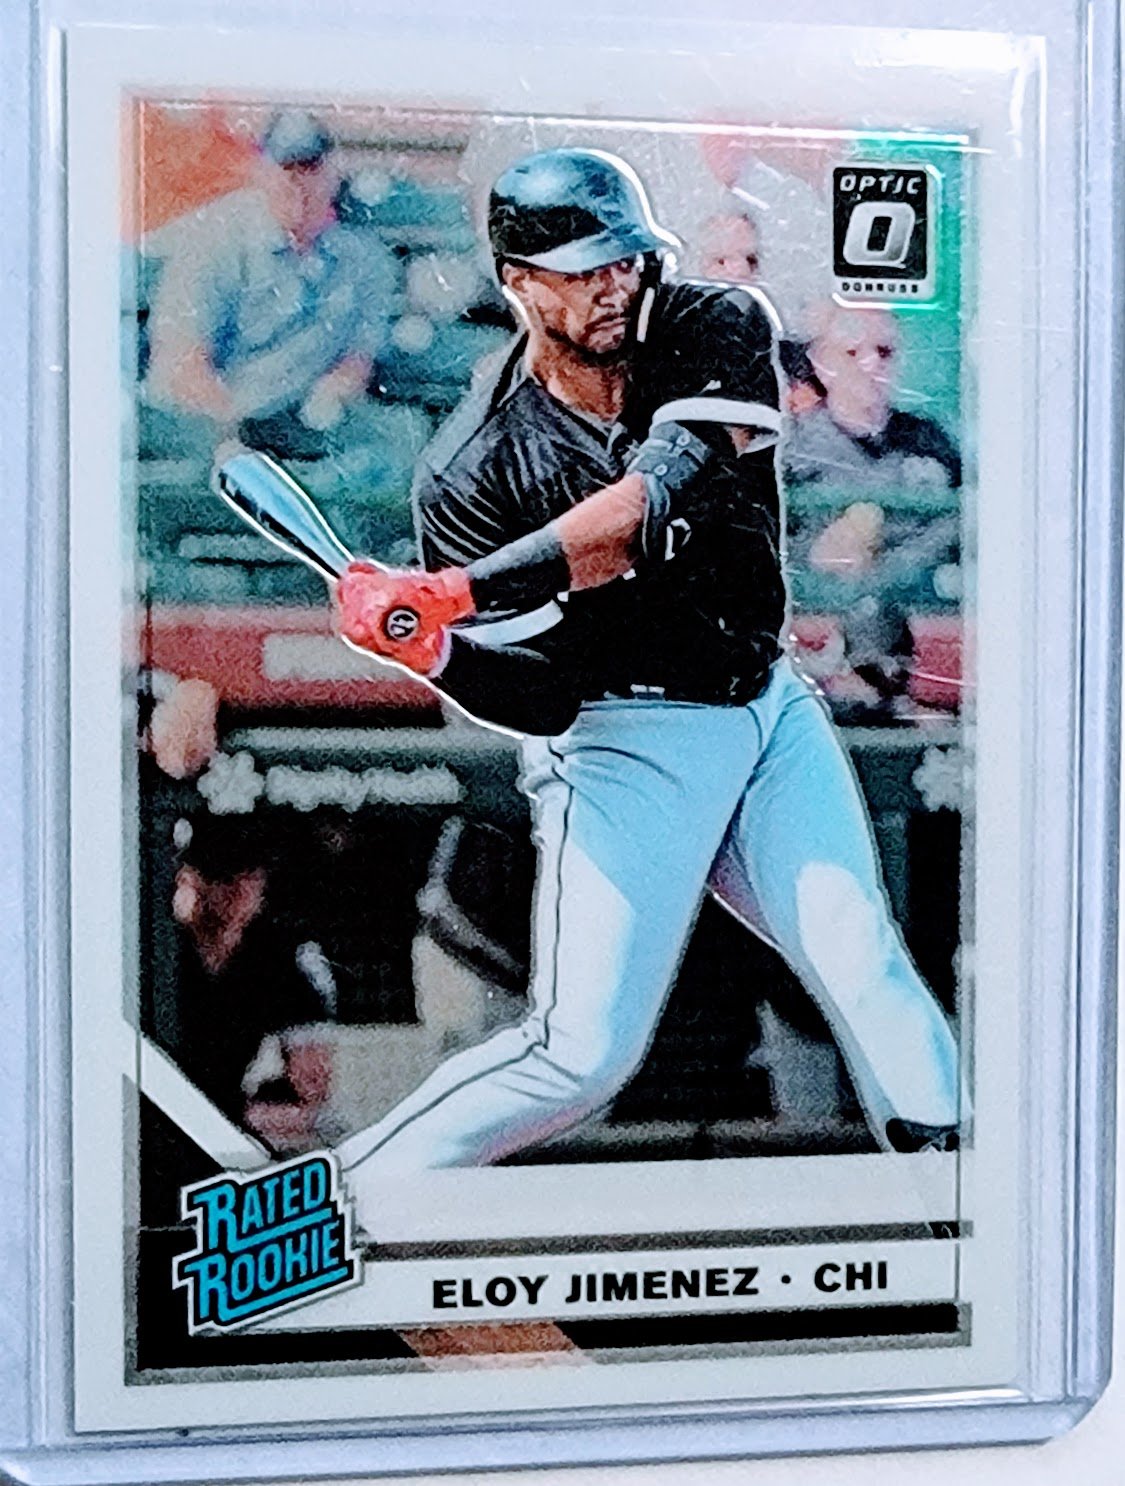 2019 Donruss Optic Eloy Jimenez Rated Rookie Baseball Card TPTV simple Xclusive Collectibles   